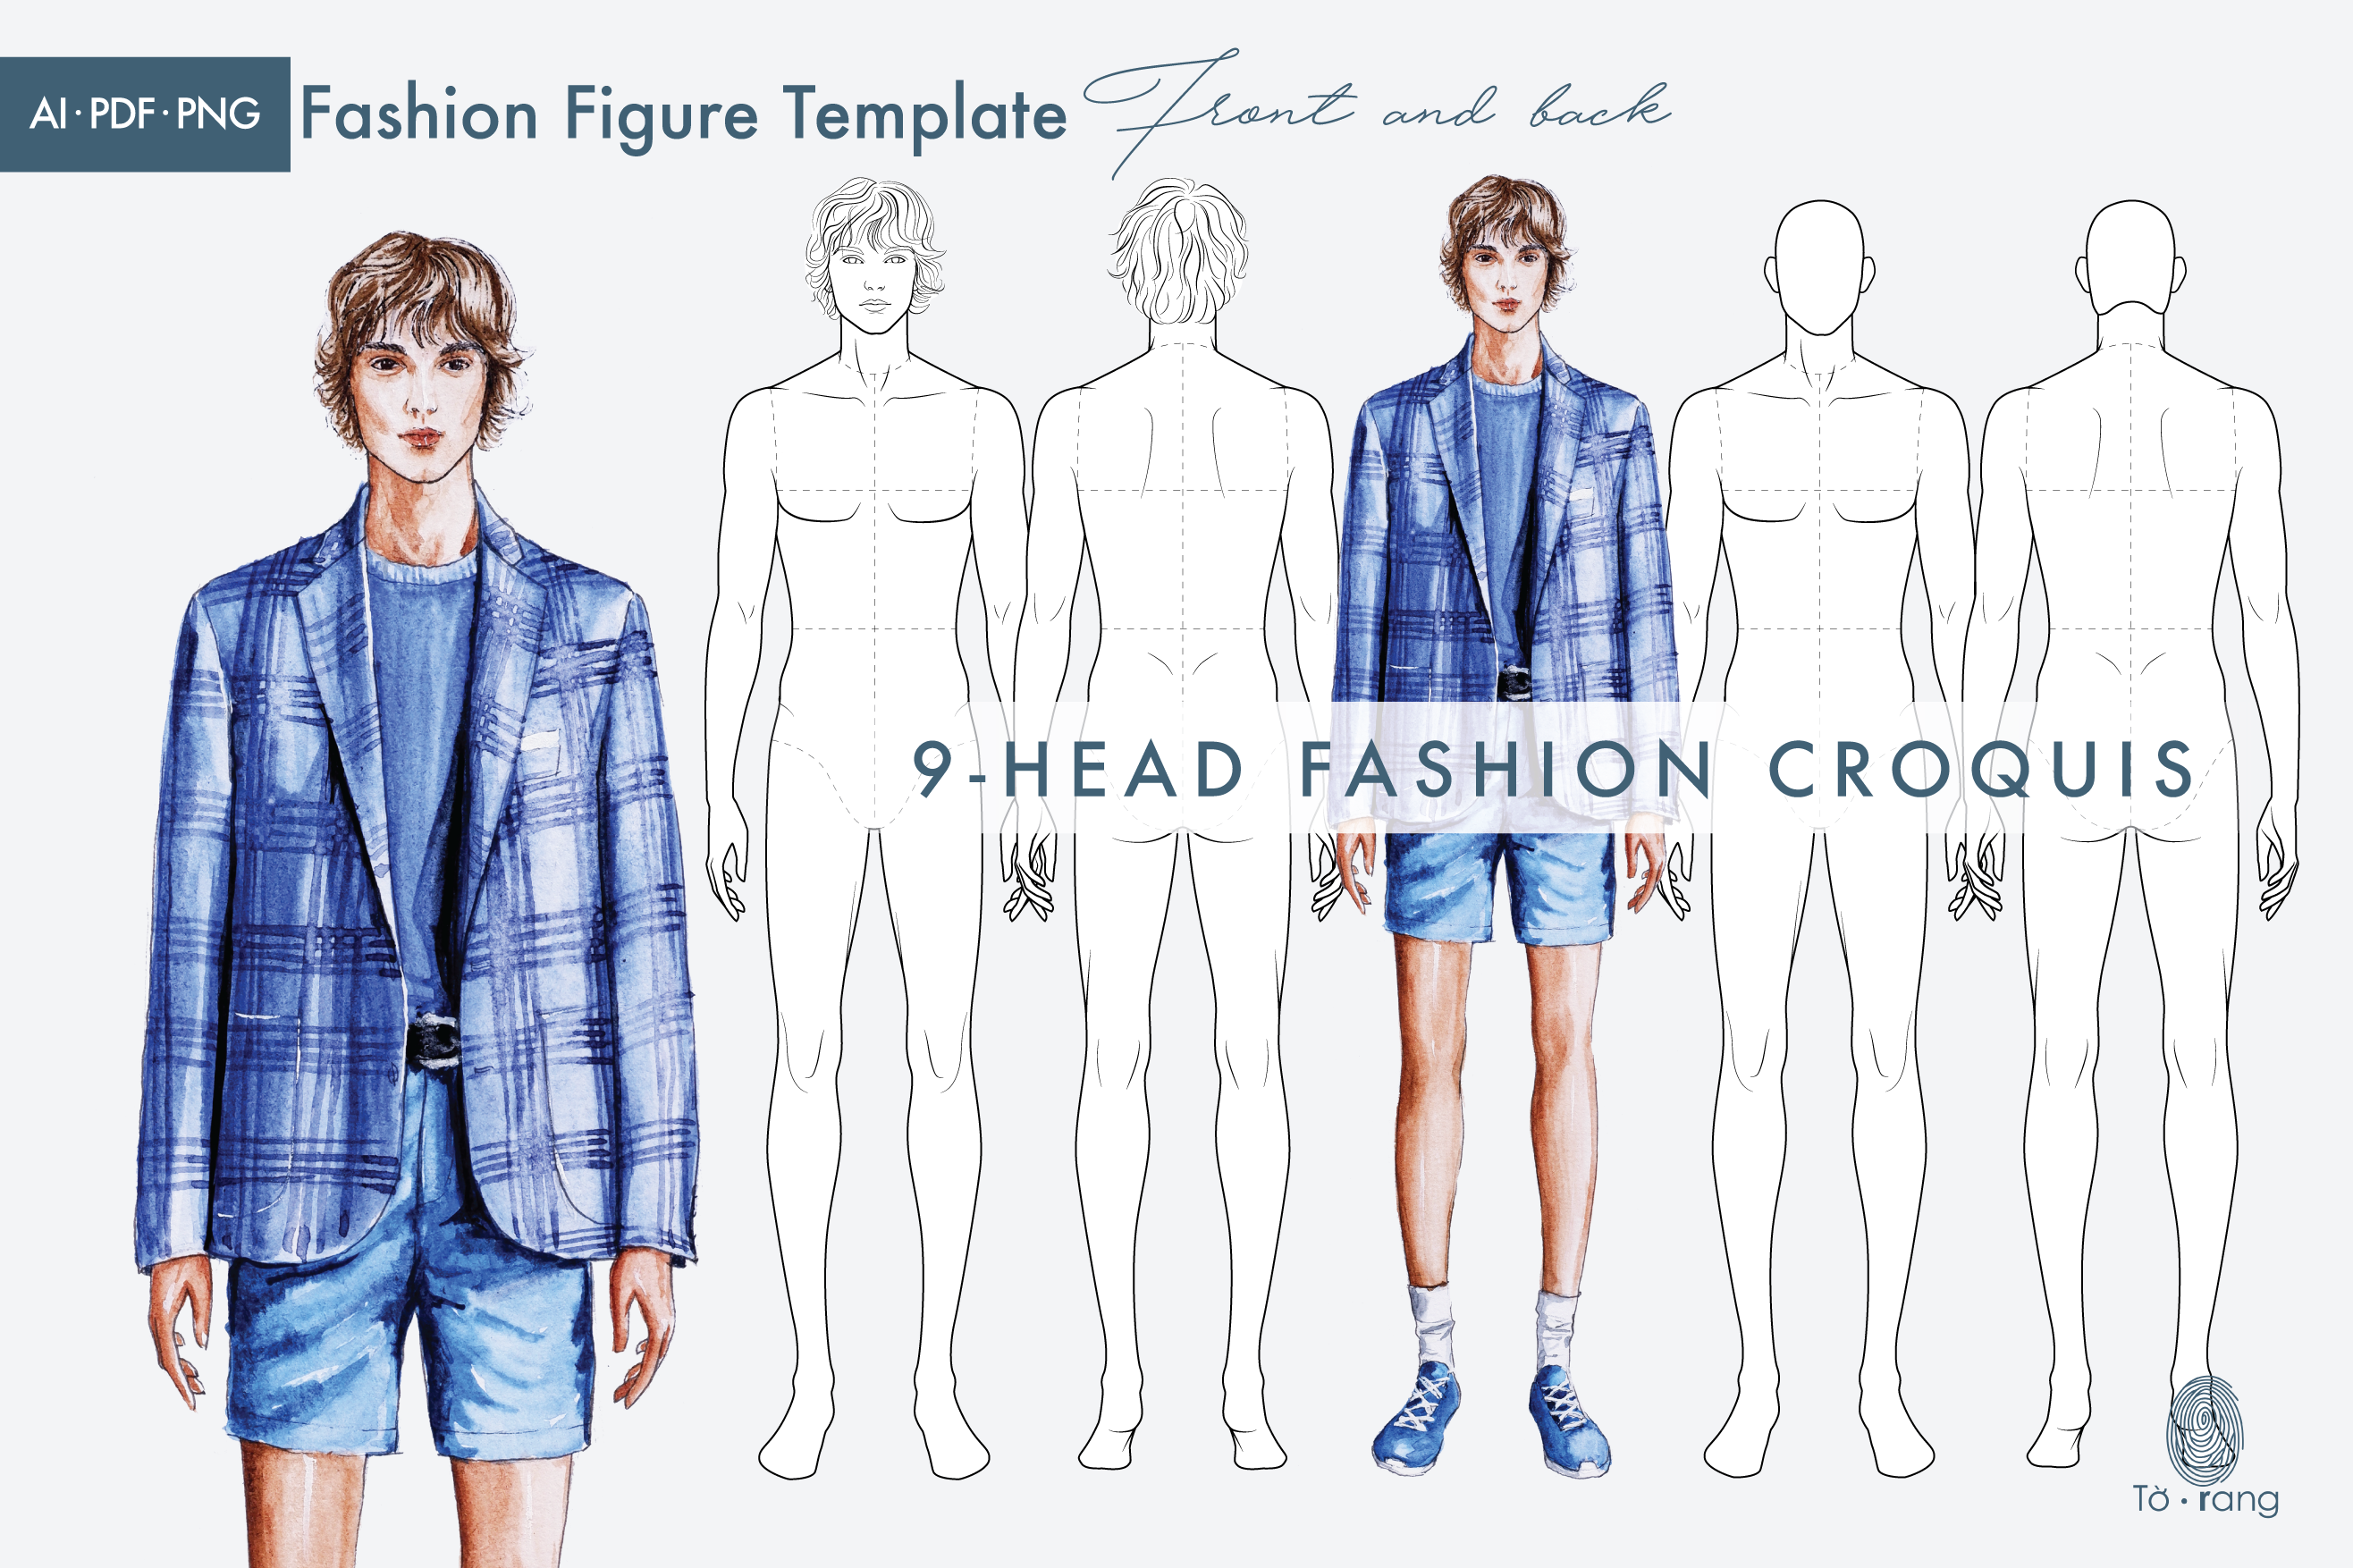 Amazon.com: FASHION SKETCH Templates - GENTS Edition: Fashion Male Charts  Workbook - Lots of Templates to Practice & Sketch Your Fashion Ideas:  World, SKETCH: Books